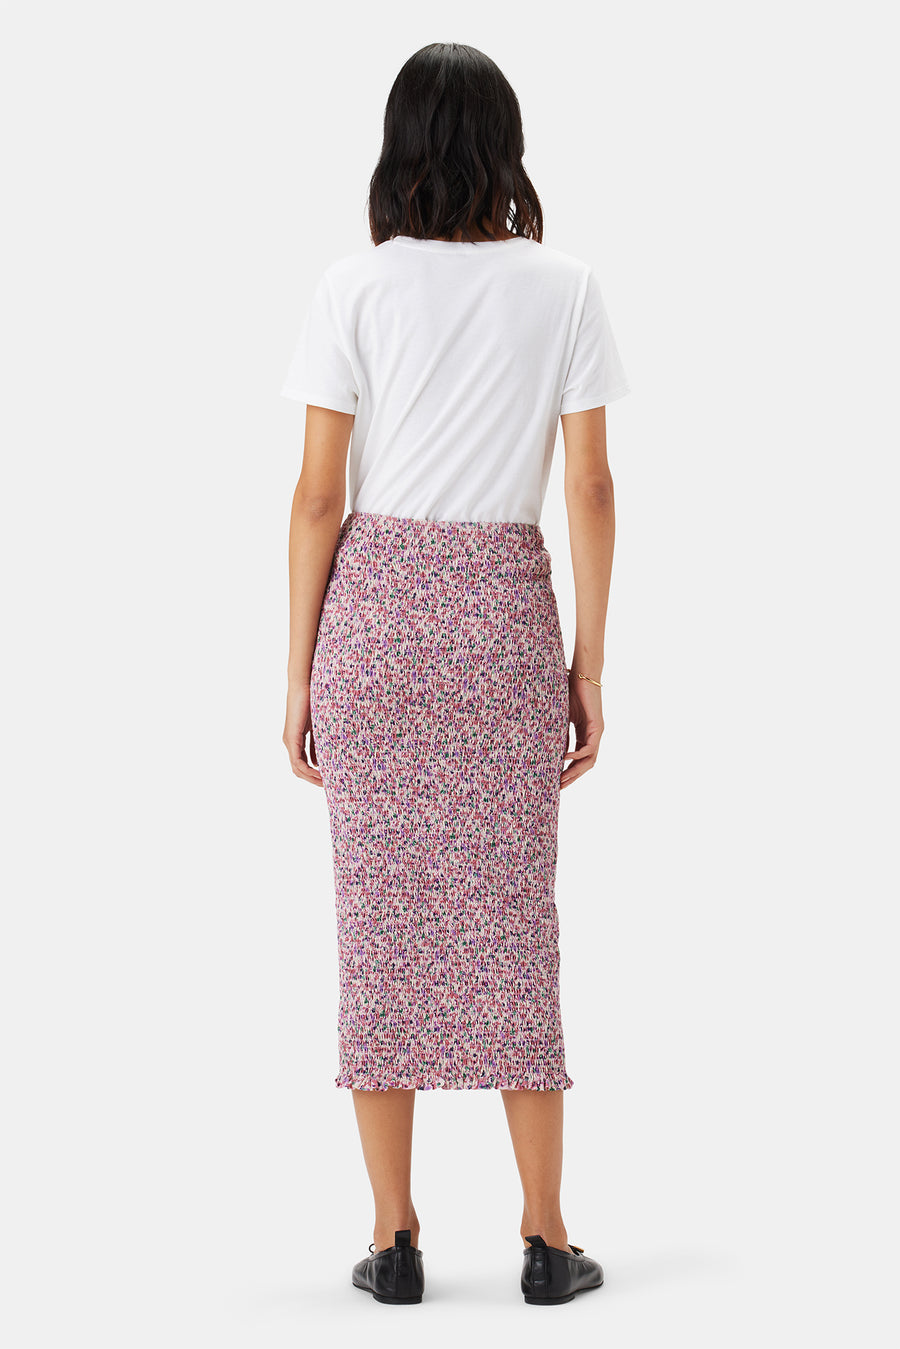 Eunice Skirt - Alessia Mulberry